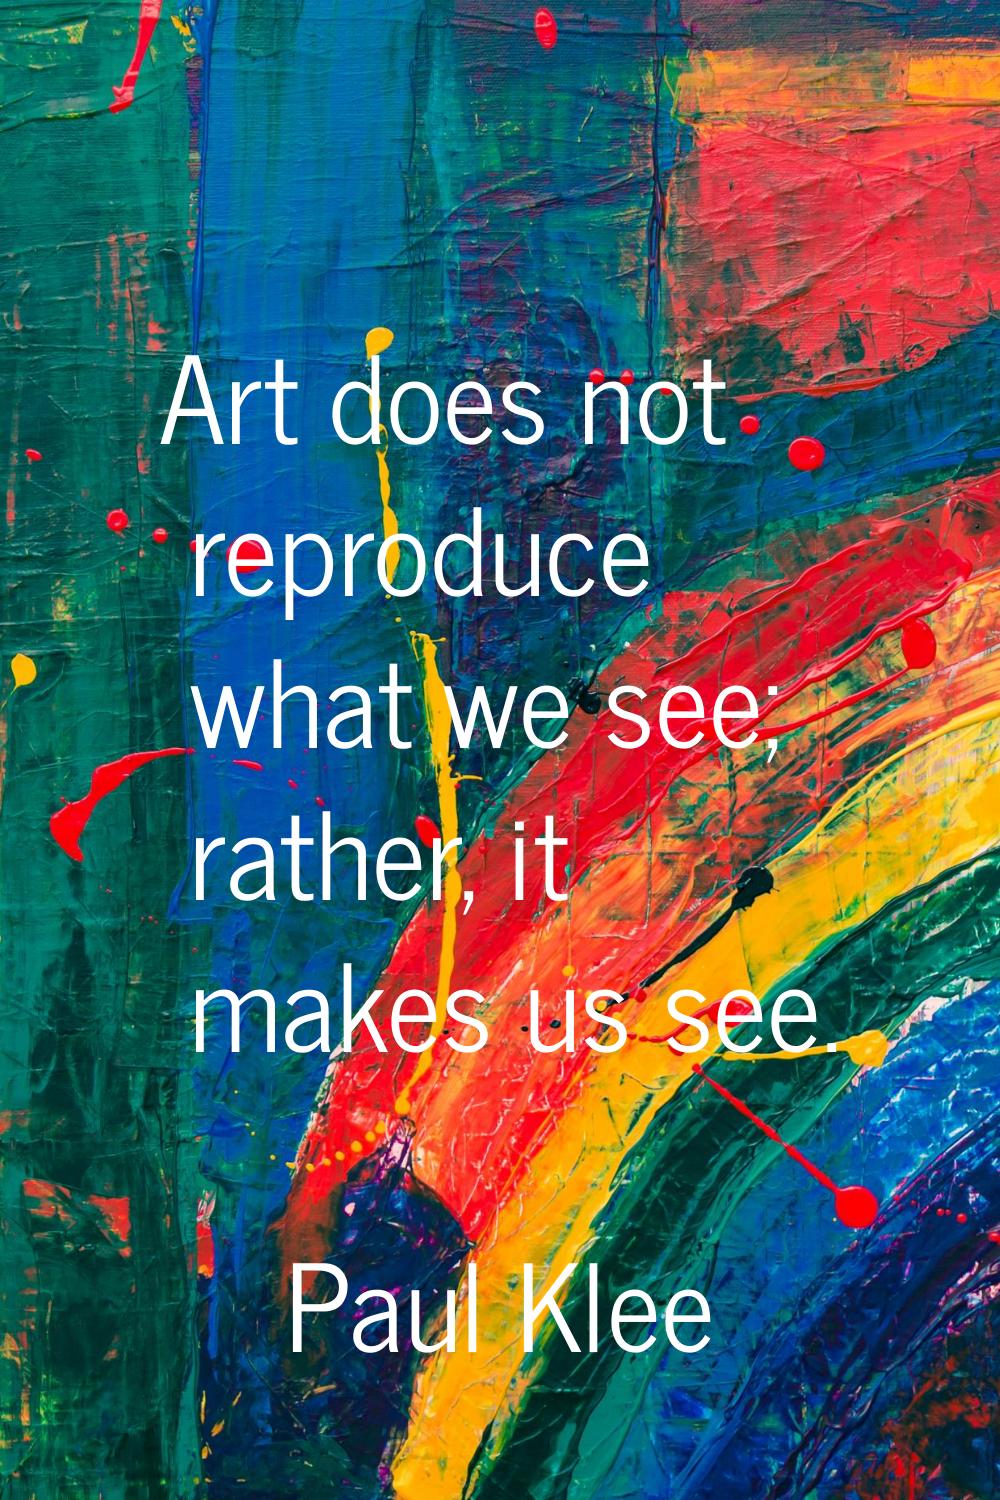 Art does not reproduce what we see; rather, it makes us see.